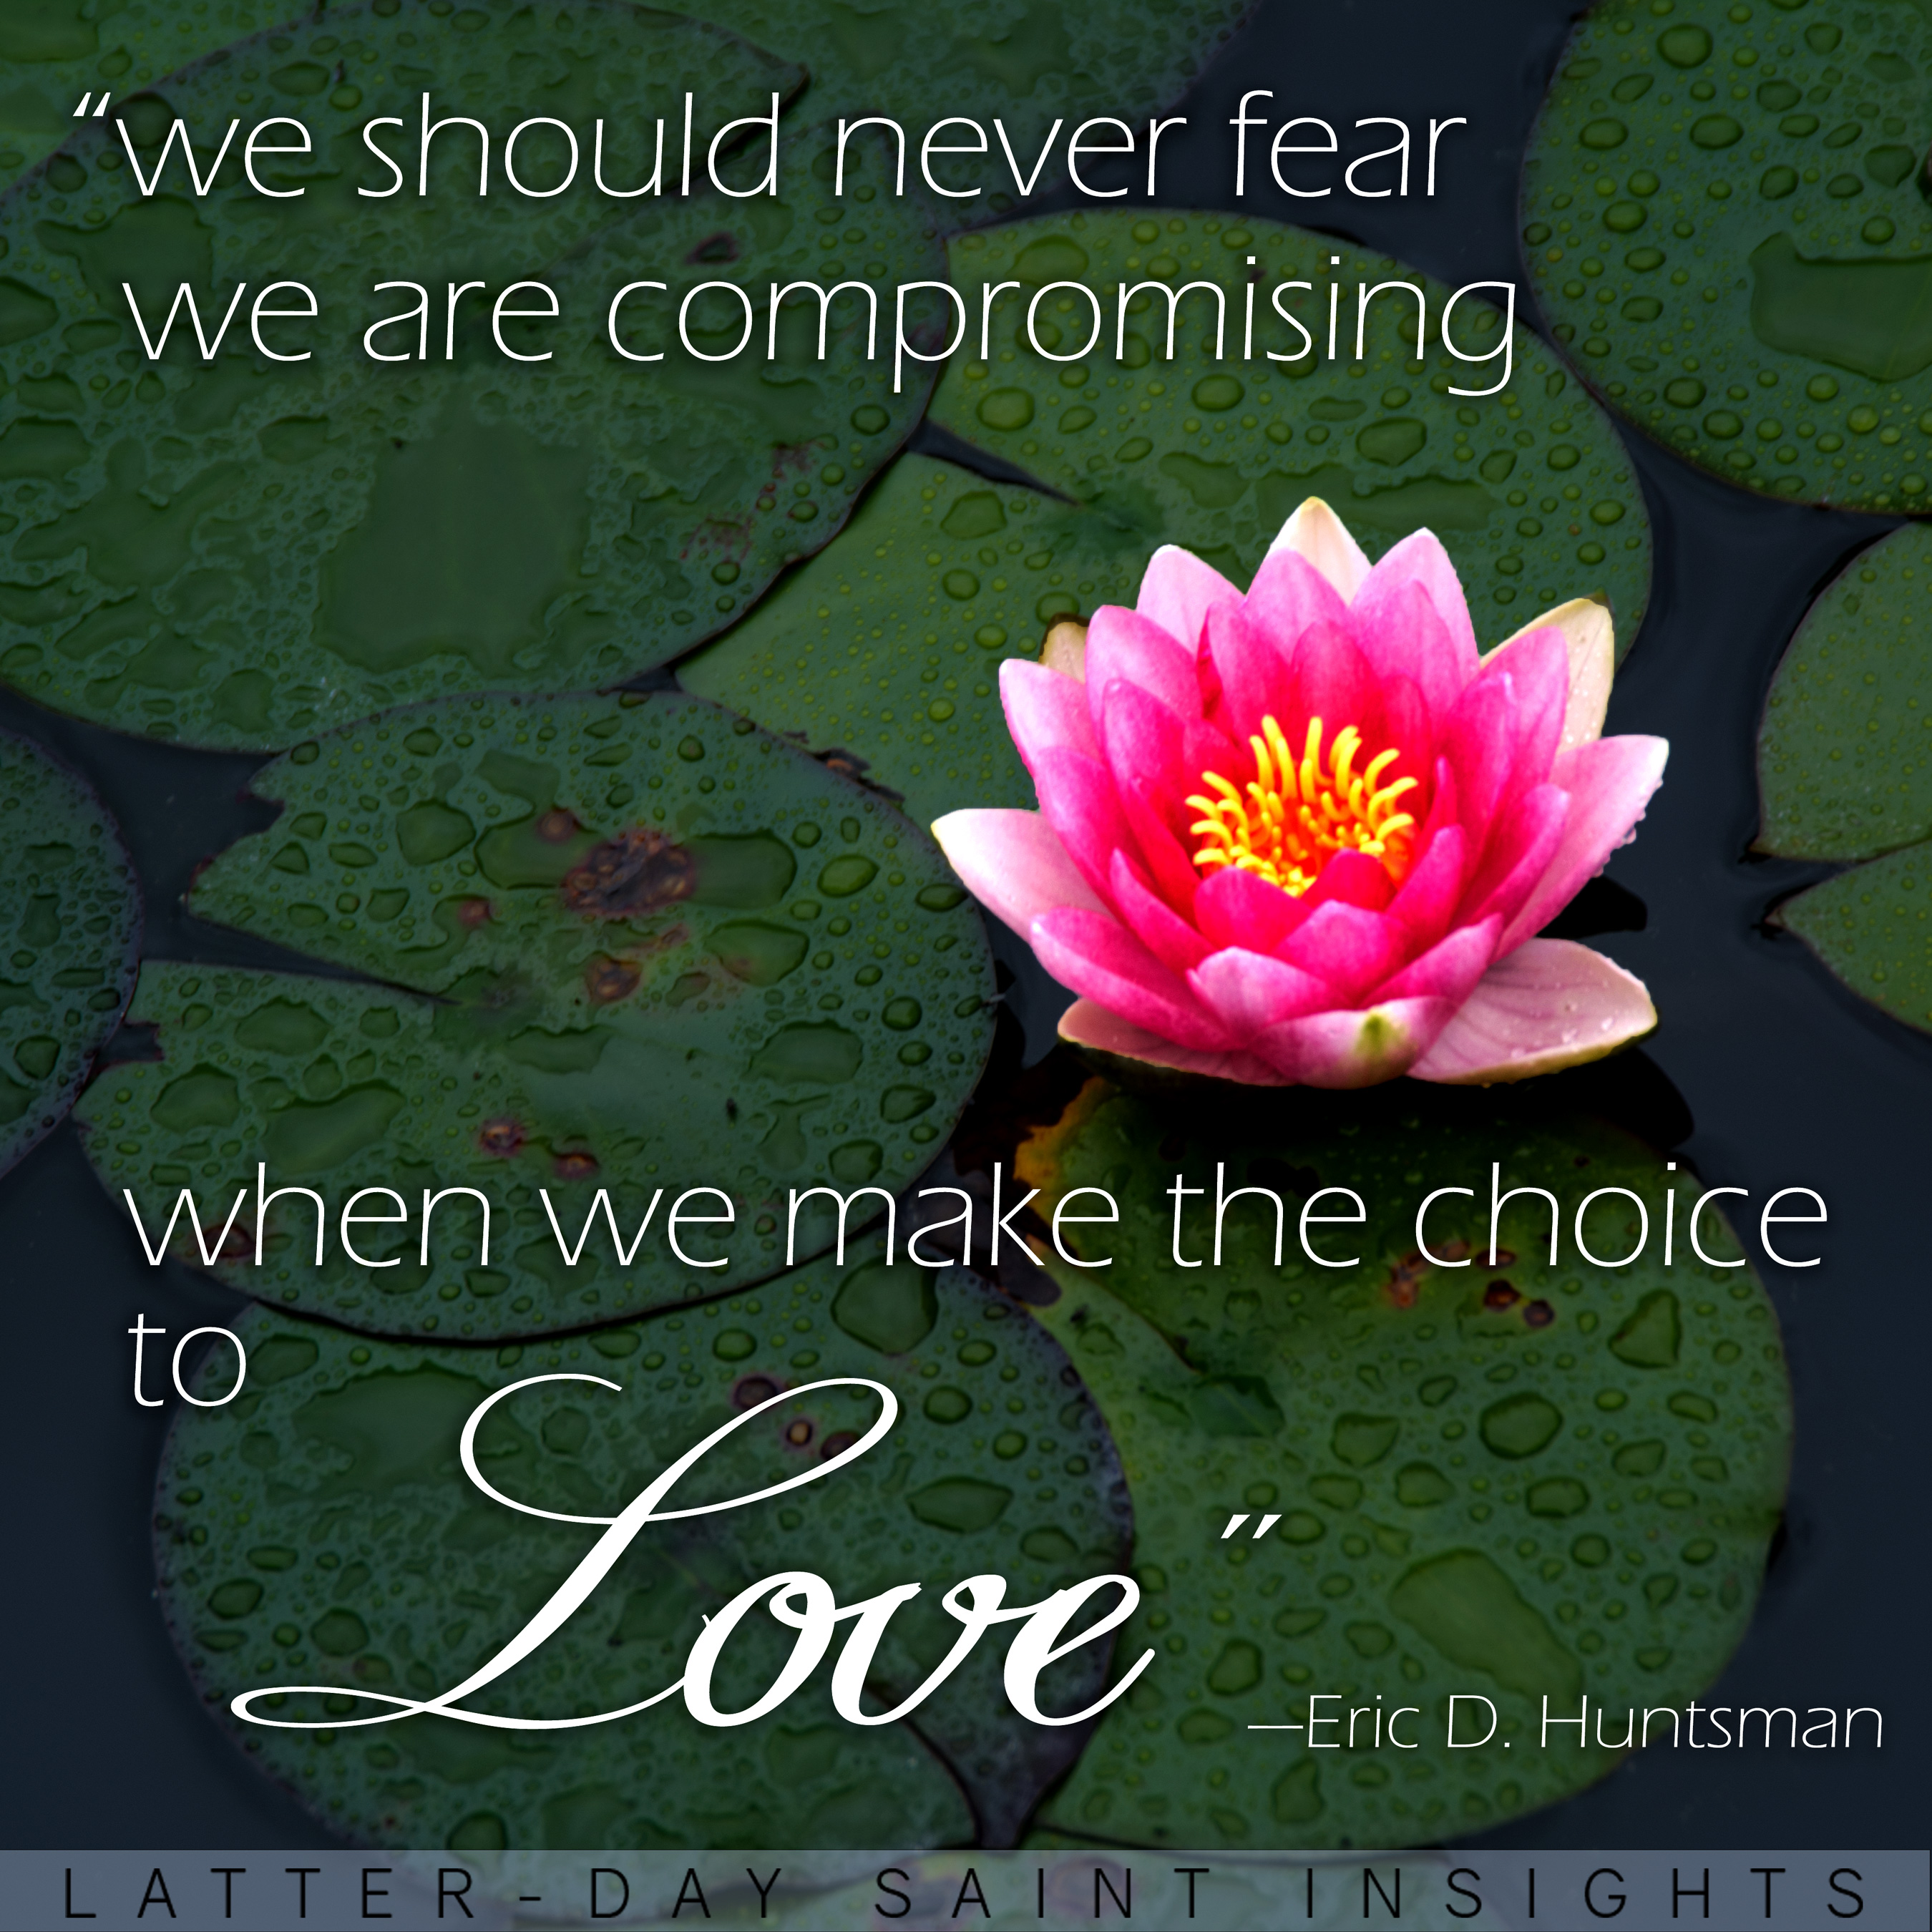 A flower and lily pads on top of dark water with Eric D. Huntsman's quote that says, "We Should never fear we are compromising when we make the choice to love."